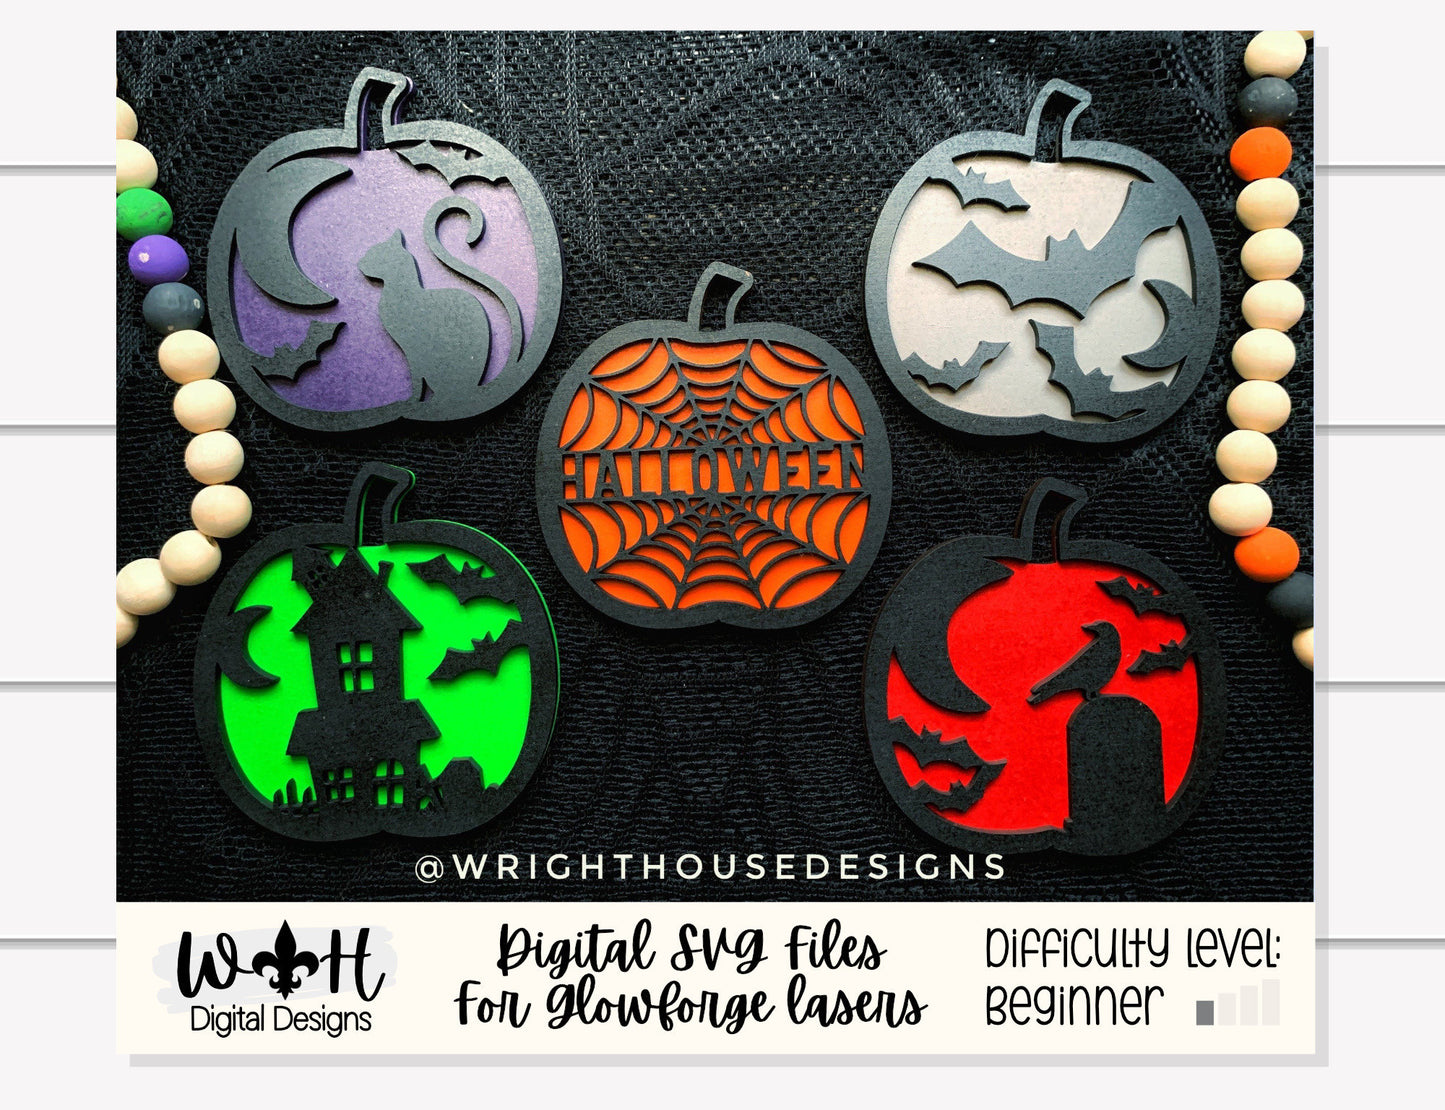 Layered Silhouette Pumpkins Ornament Bundle - Seasonal Tiered Tray Decor and DIY Kits - Cut File For Glowforge Lasers - Digital SVG File